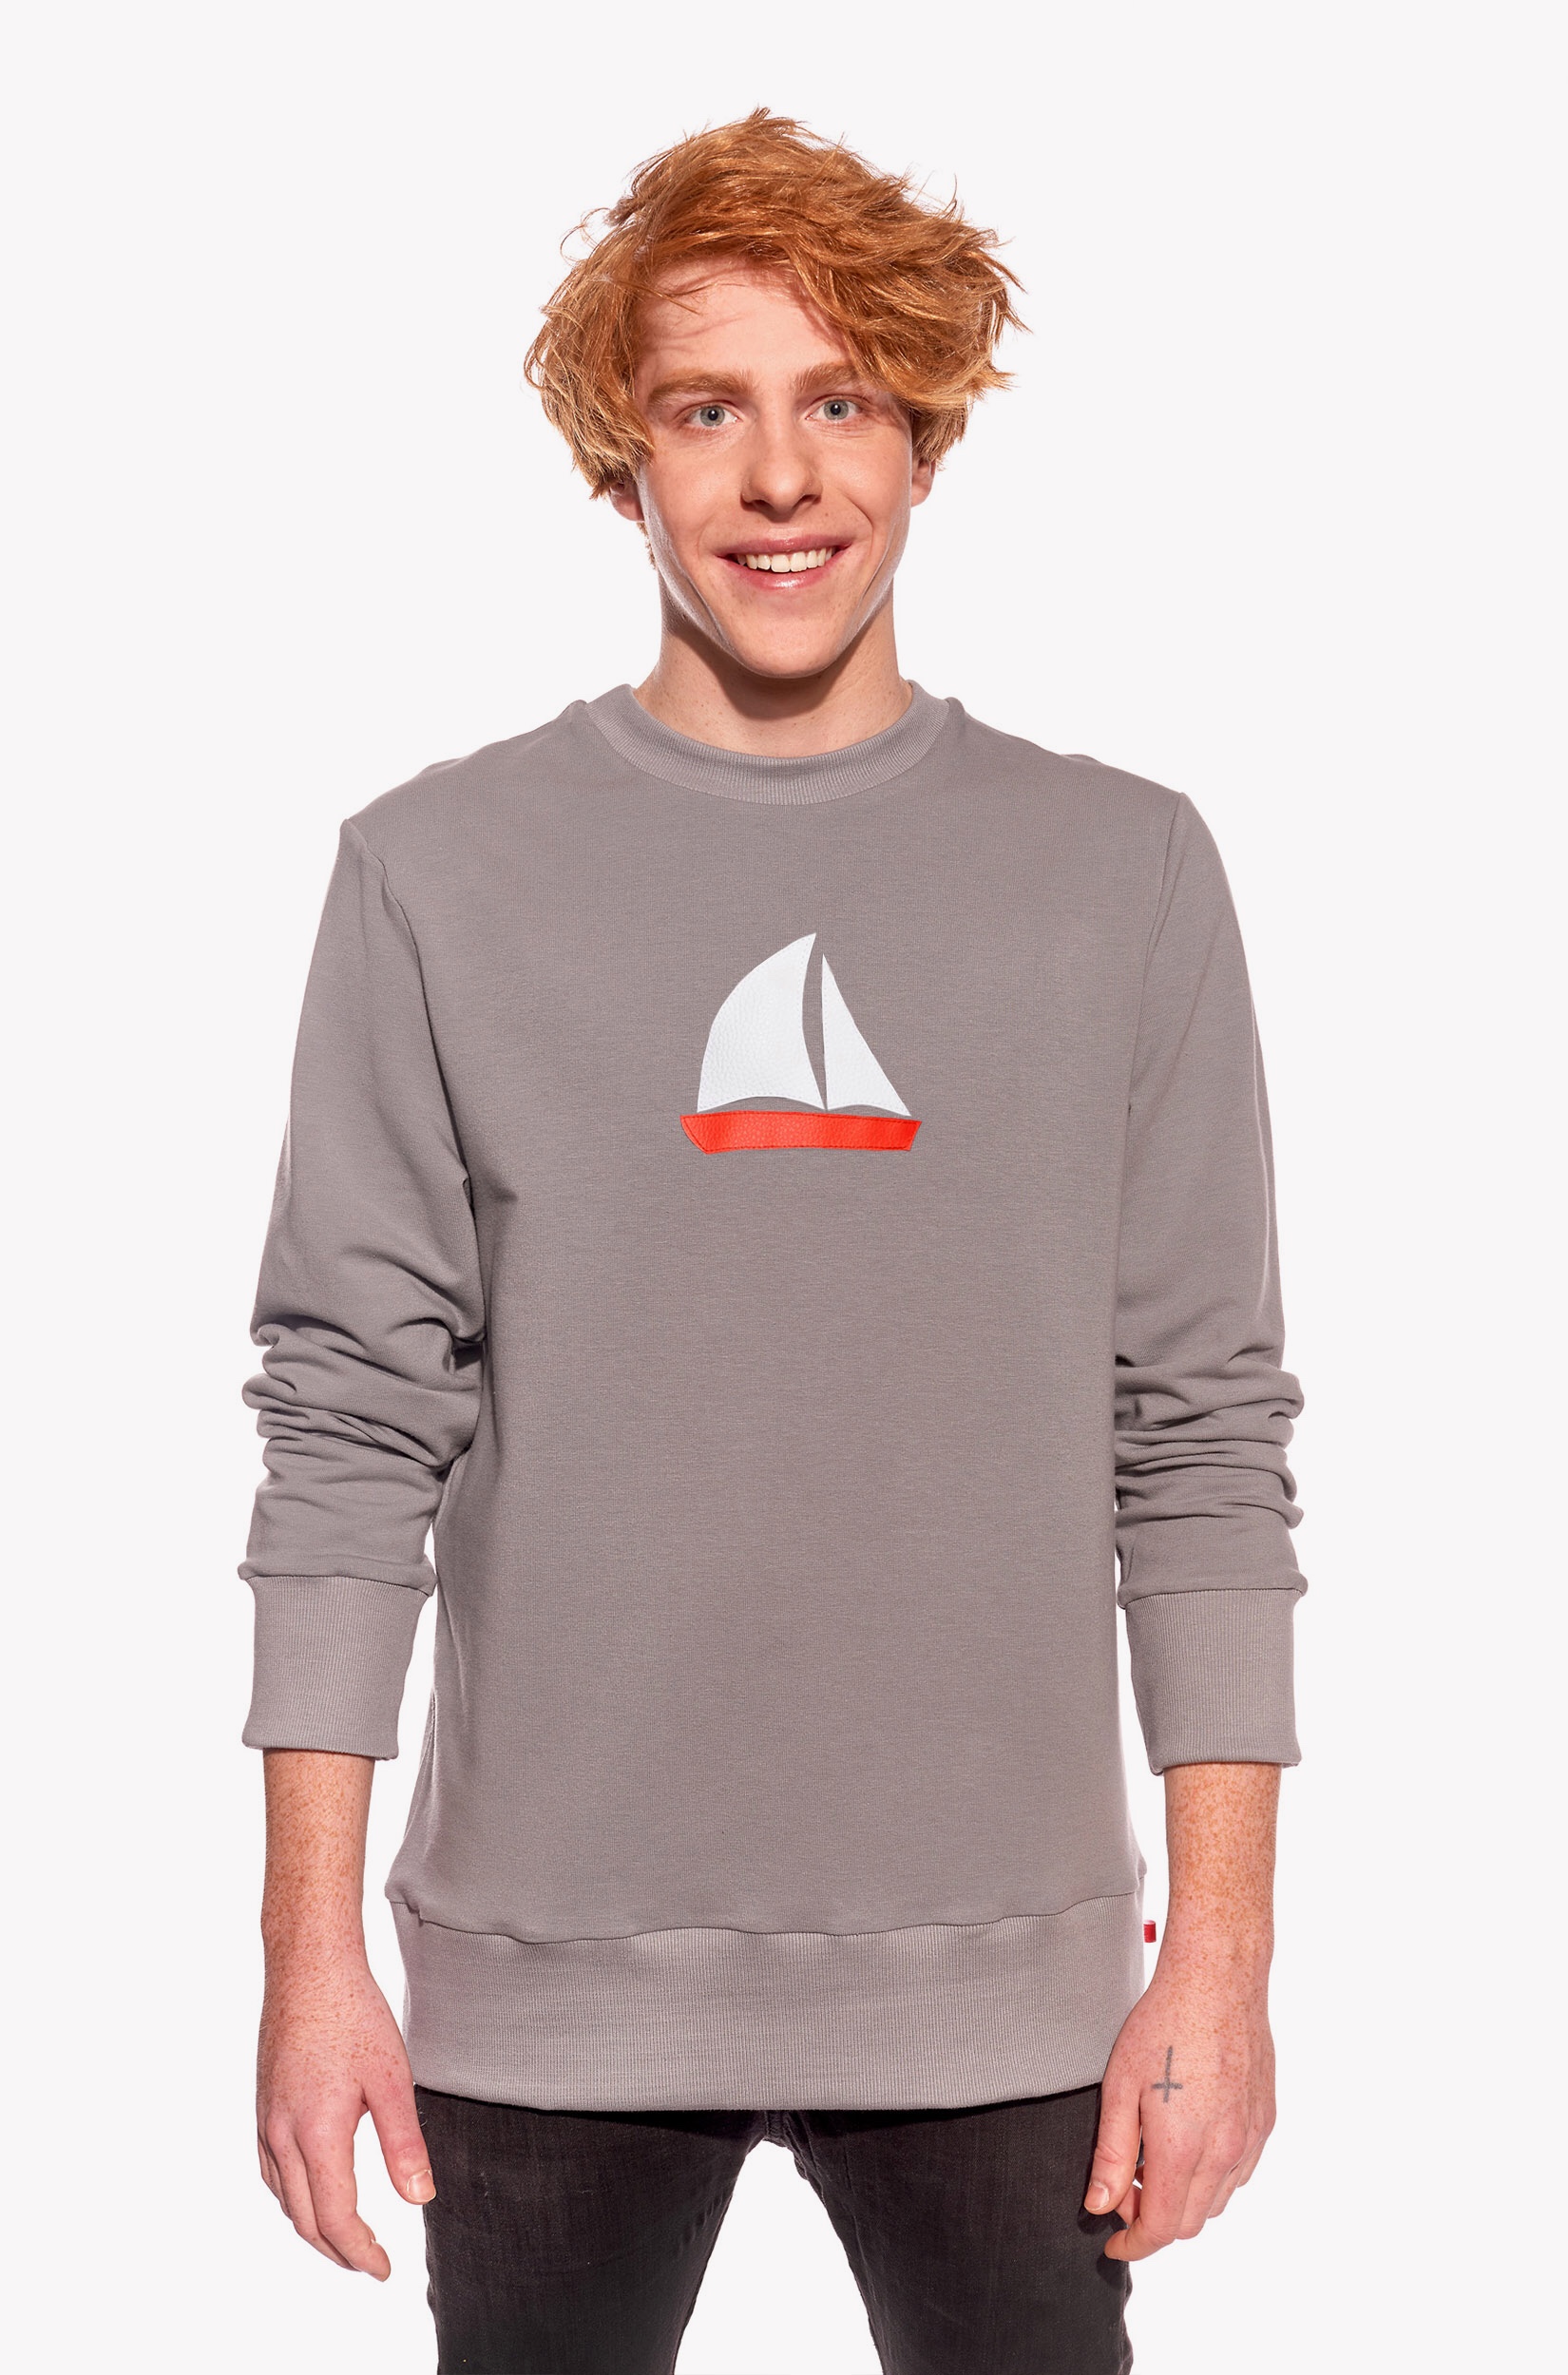 Hoodie with sailboat